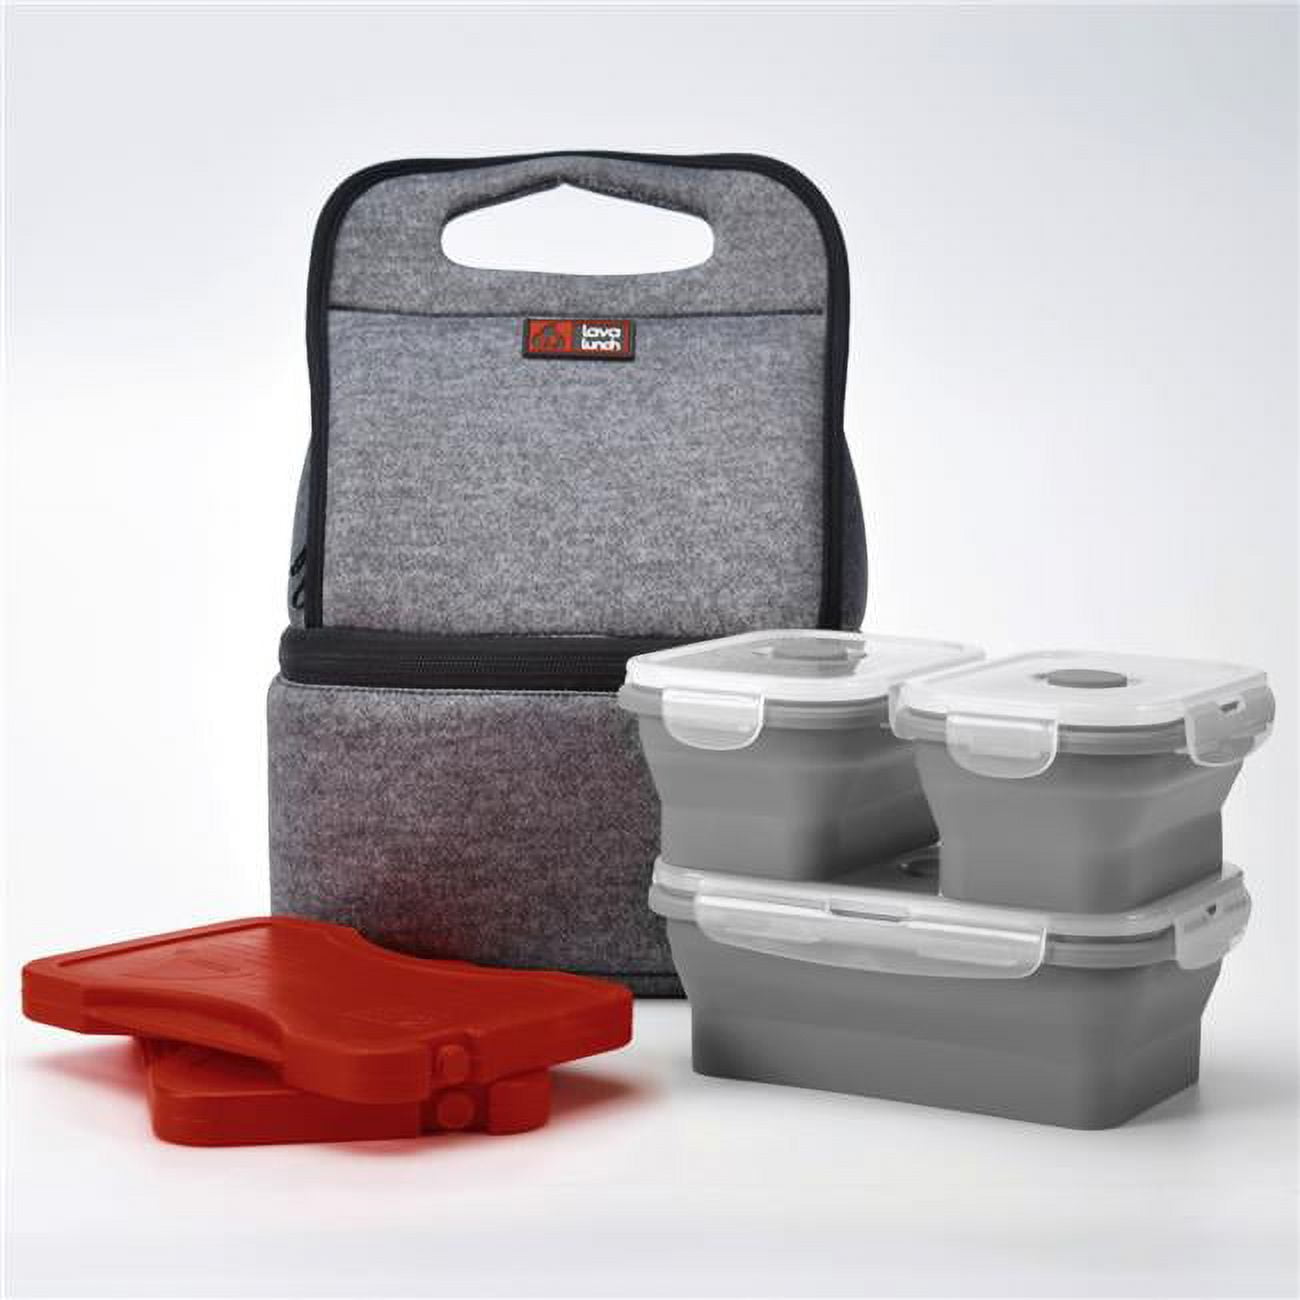 Lava Lunch 860006273323 Space Lunch Bag 